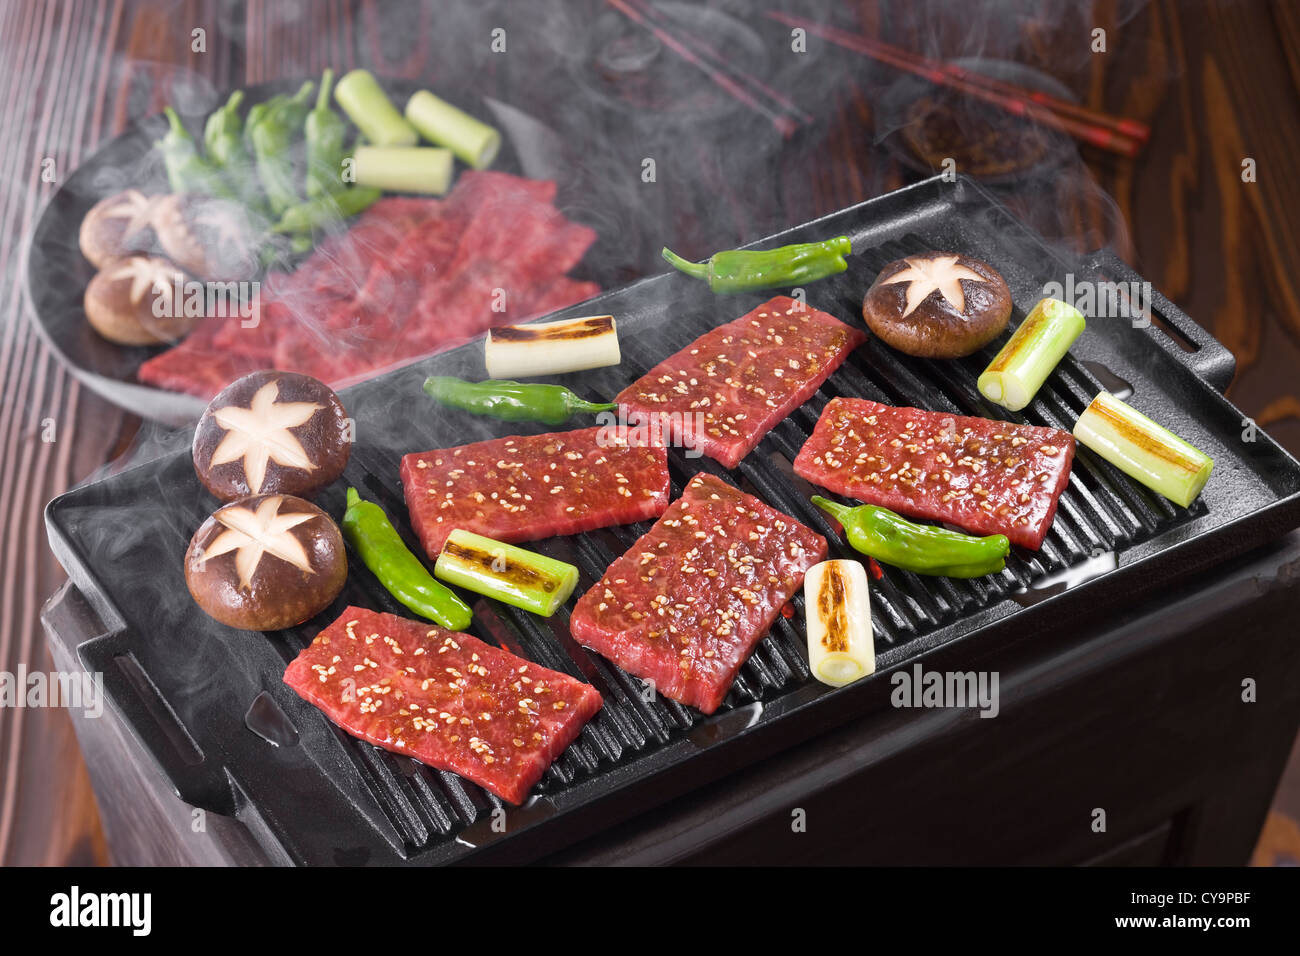 Korean Barbecue on Grill Plate Stock Photo